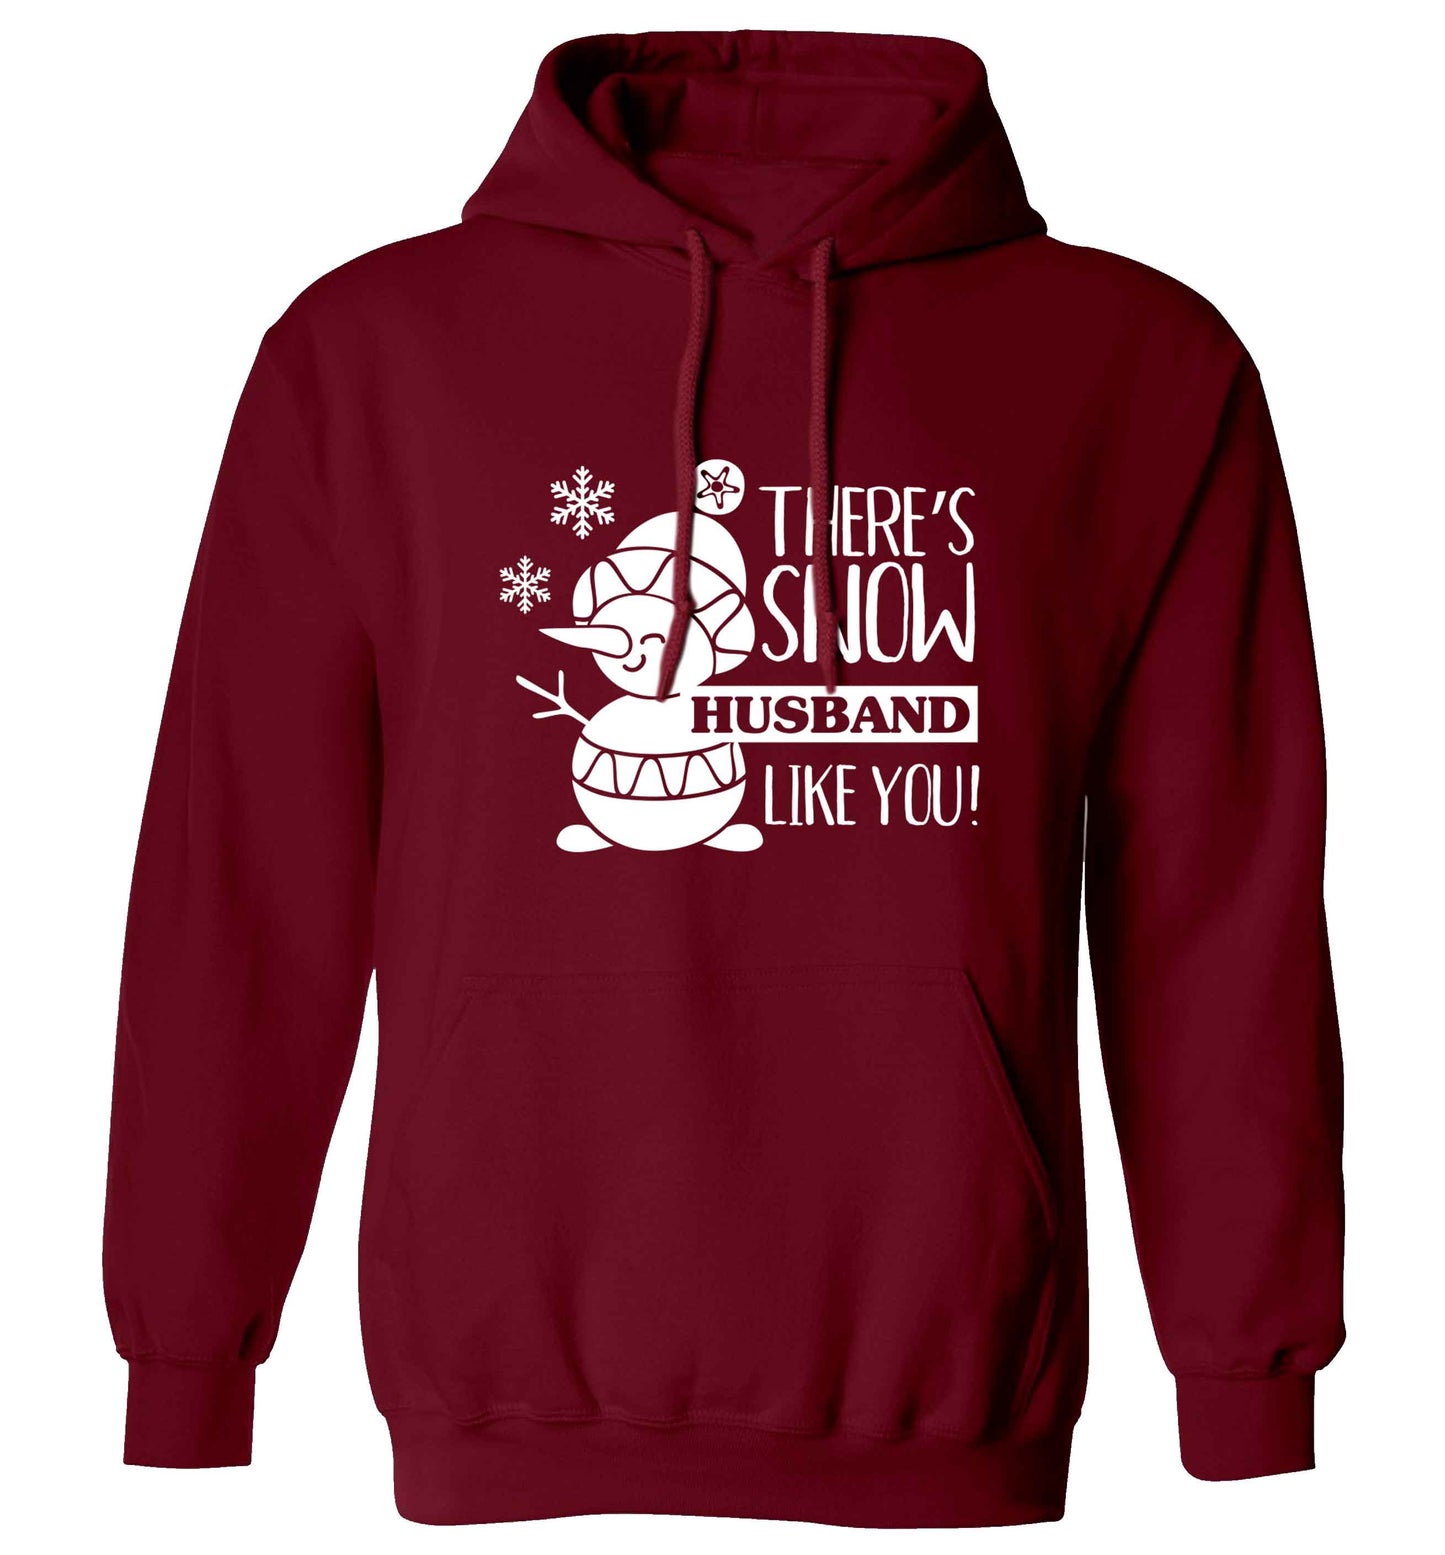 There's snow husband like you adults unisex maroon hoodie 2XL